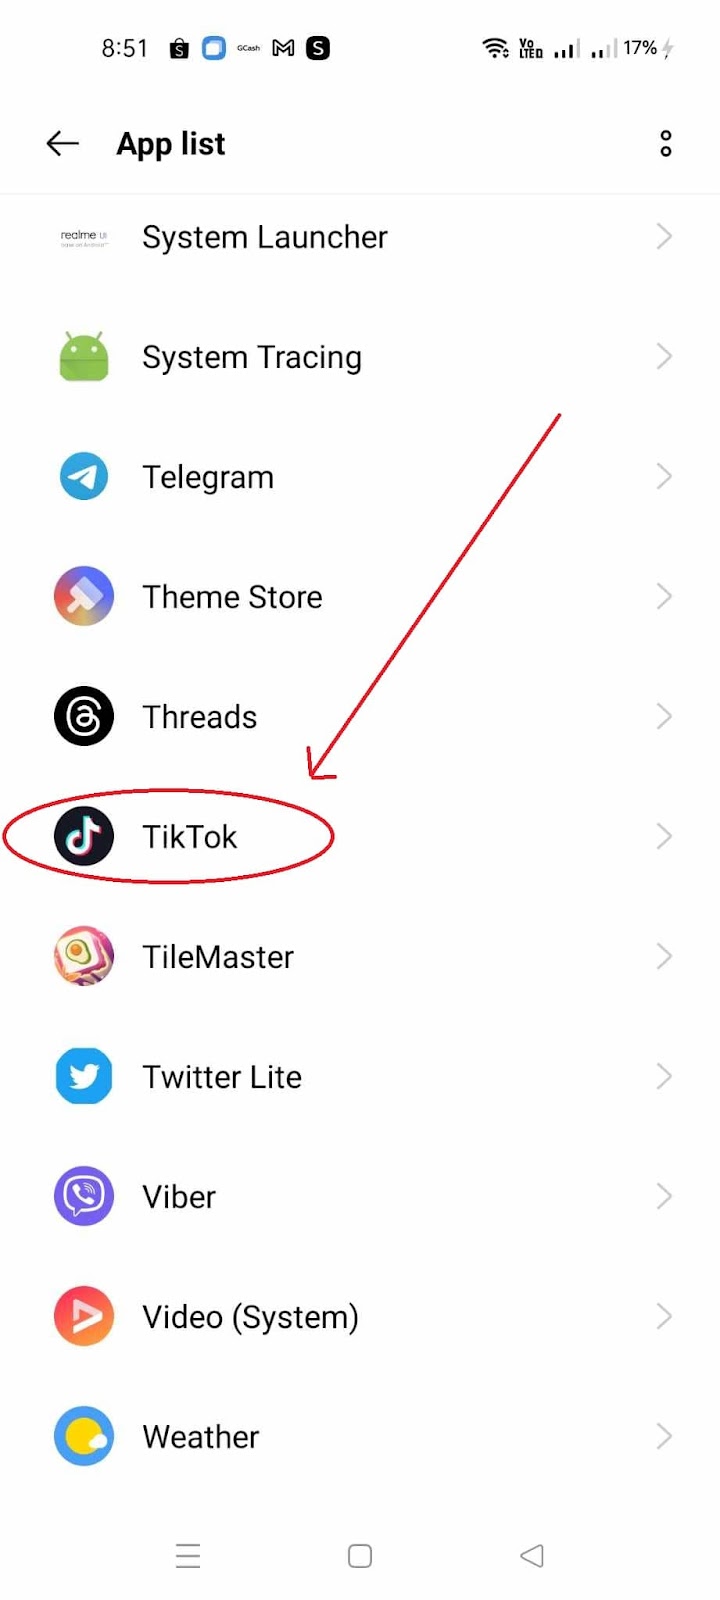 Why are my Tiktoks not showing up on the following page - Find Tiktok in the App List